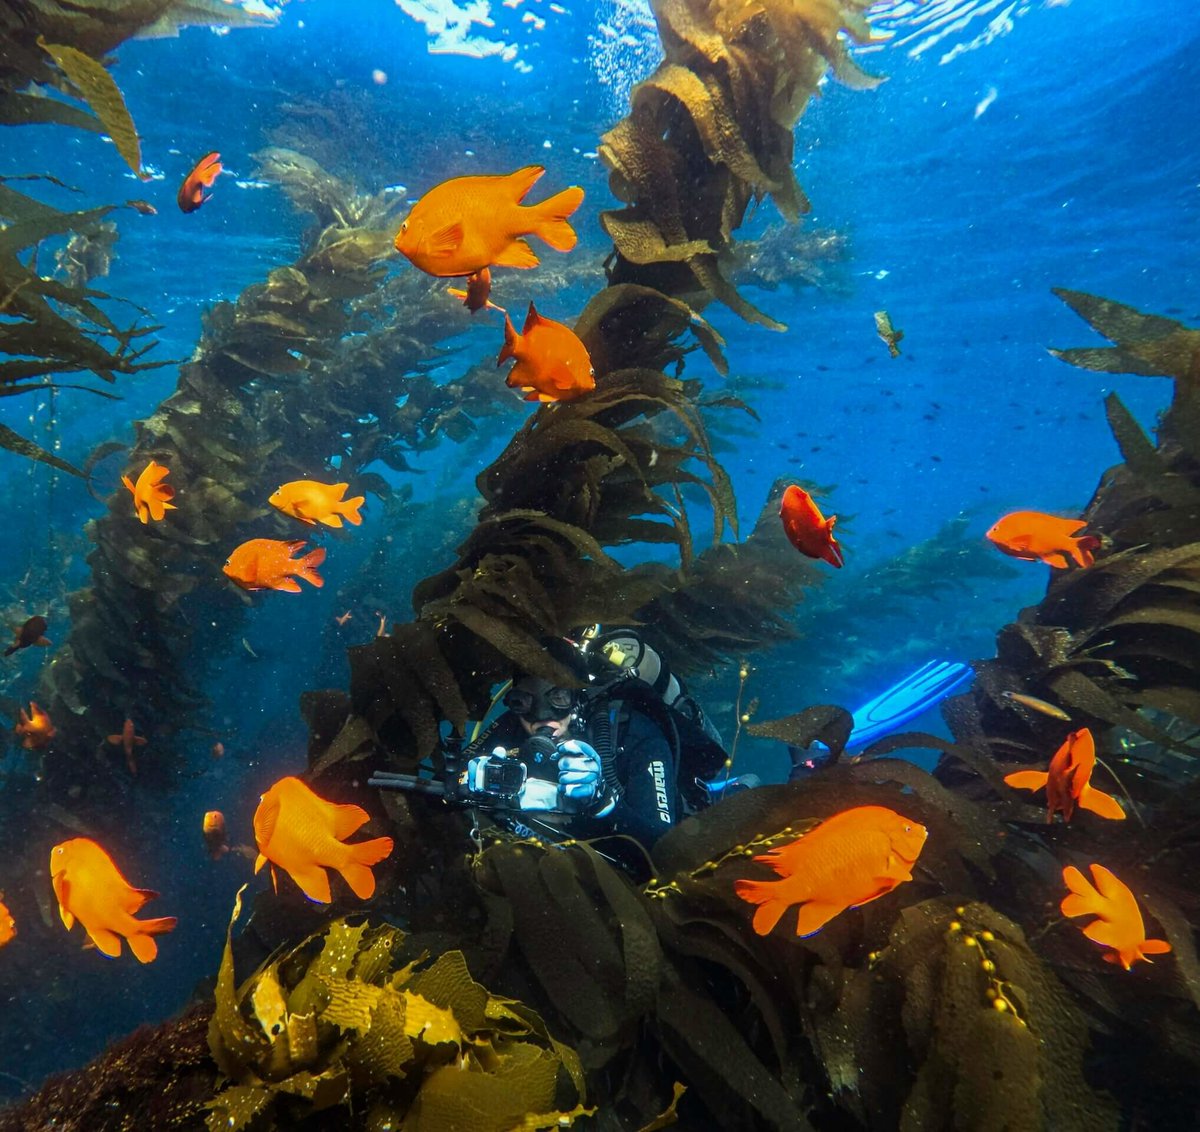 GoPro and PADI Link Up on New Specialty Certification Program for Scuba Divers luxurylifestyle.com/headlines/gopr… #gopro #camera #video #GoProcamera